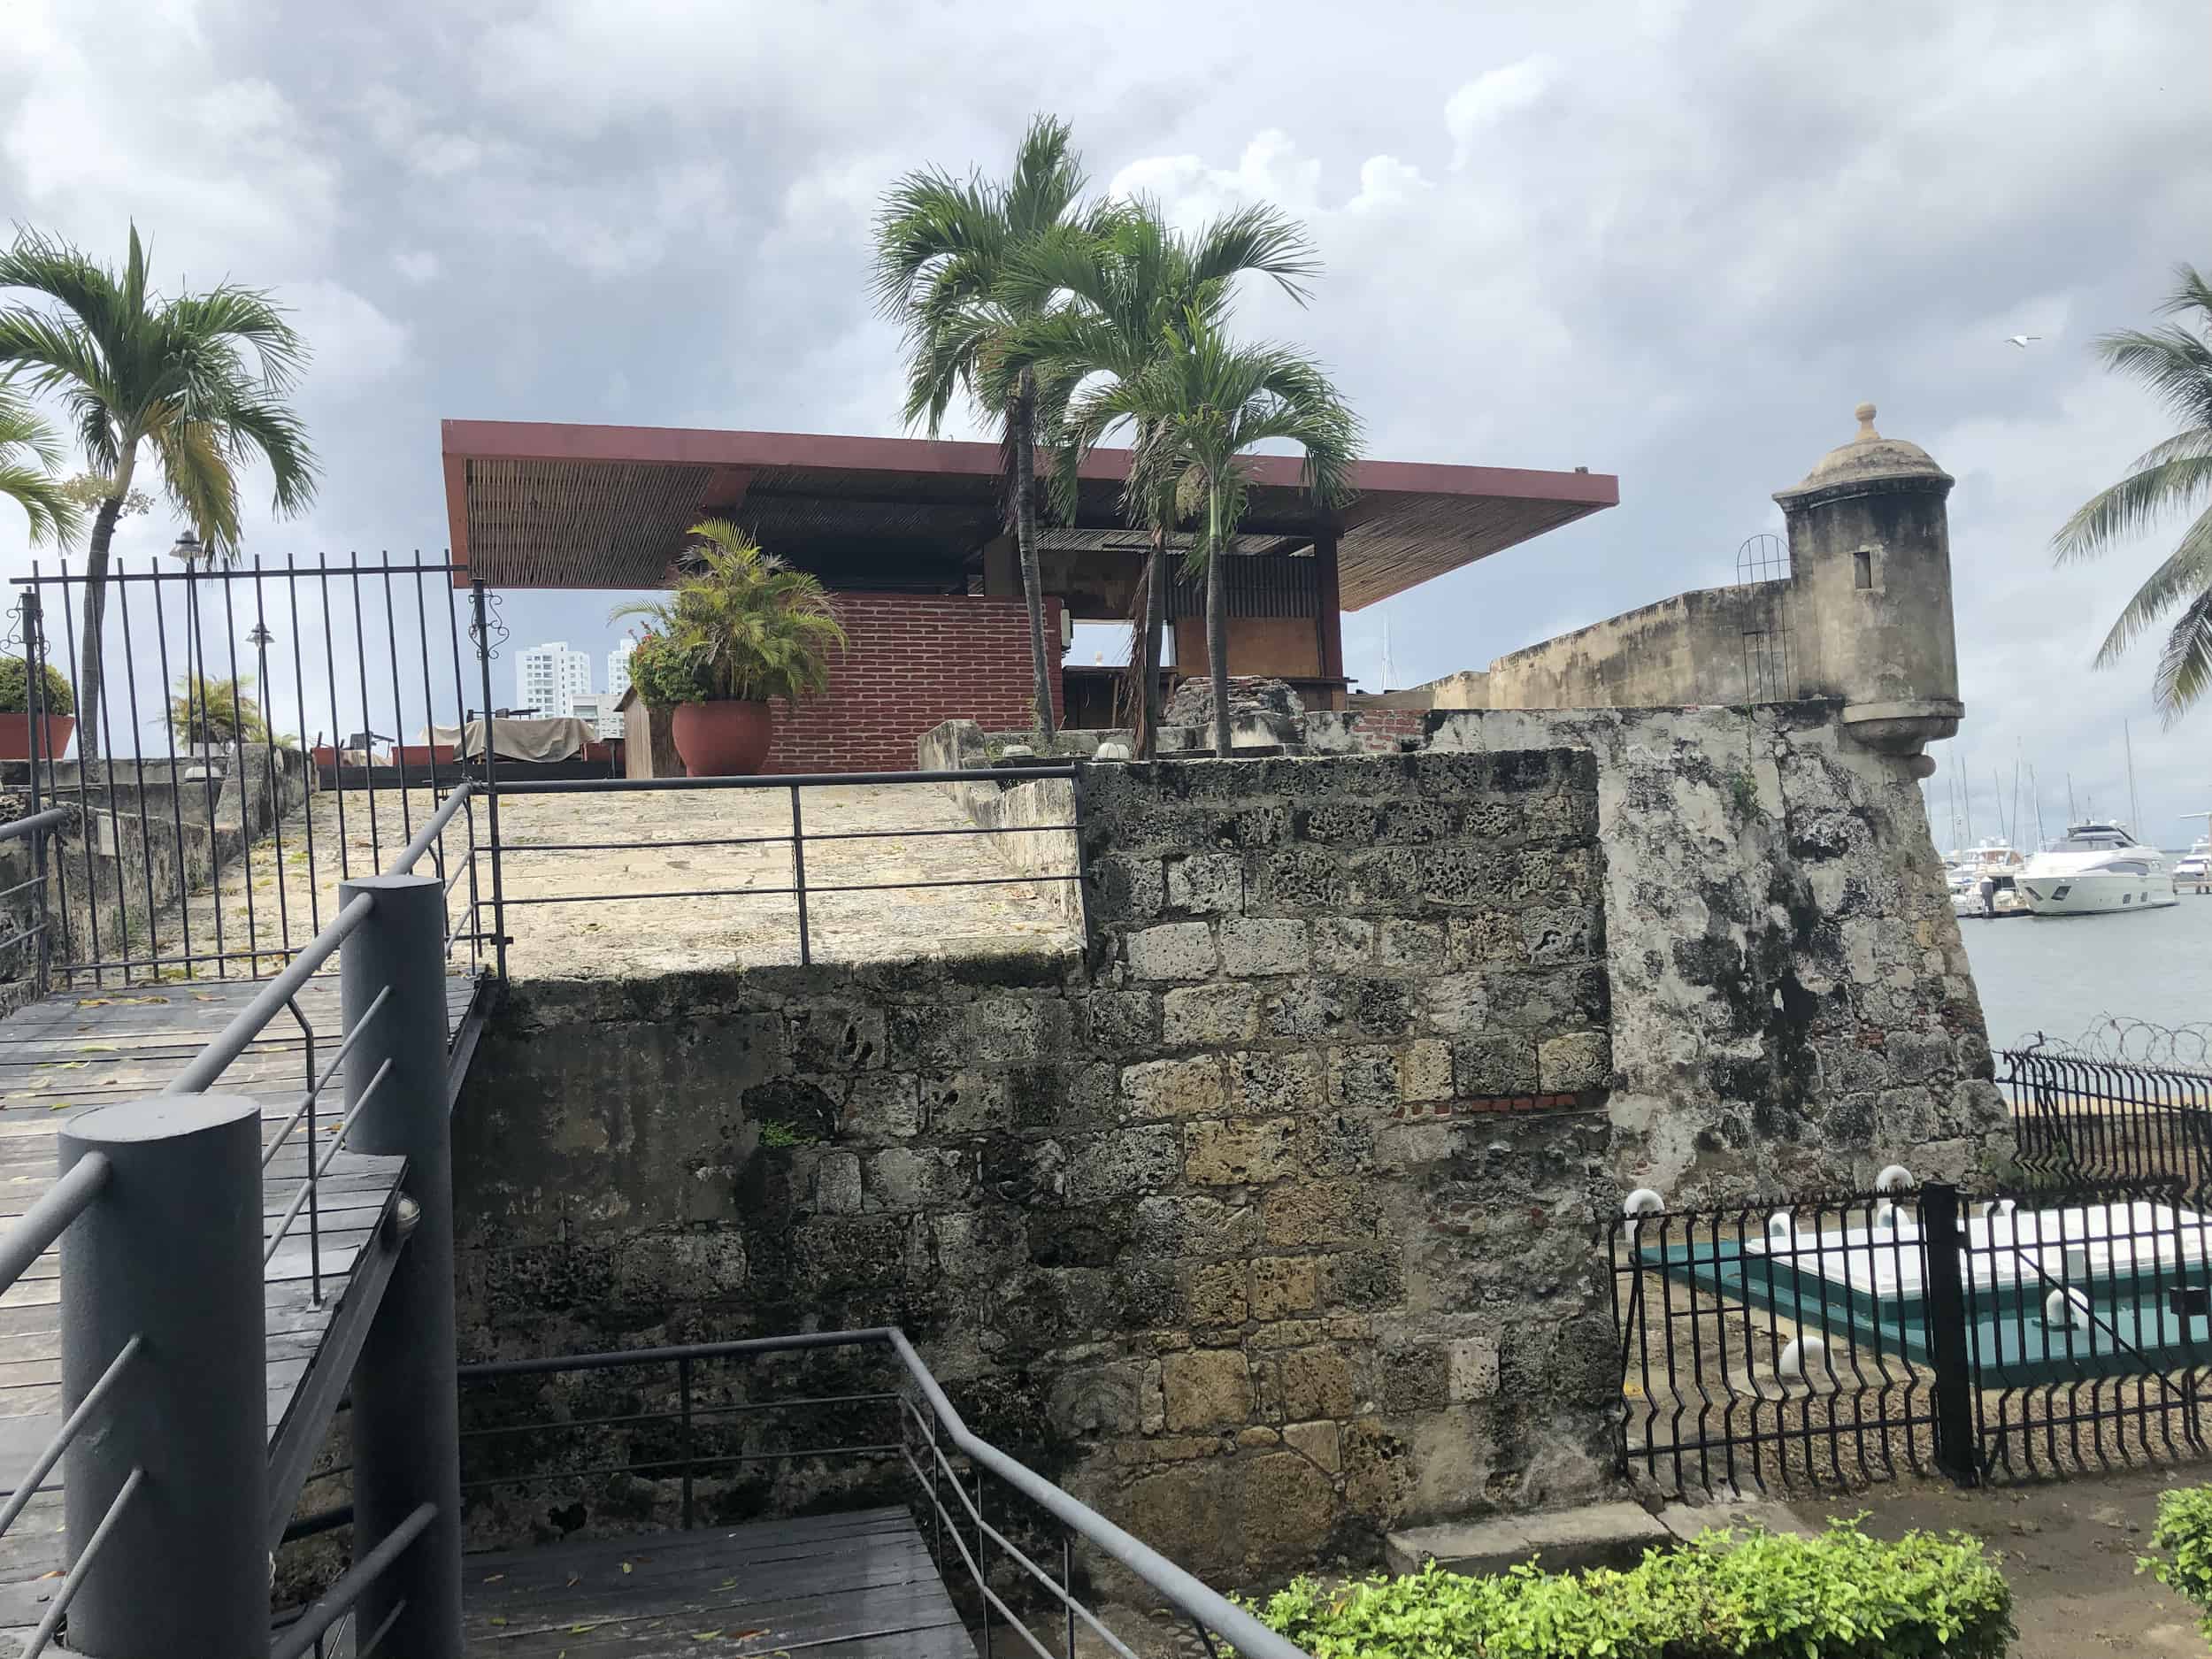 Redoubt Bastion on the Walls of Getsemaní, Colombia